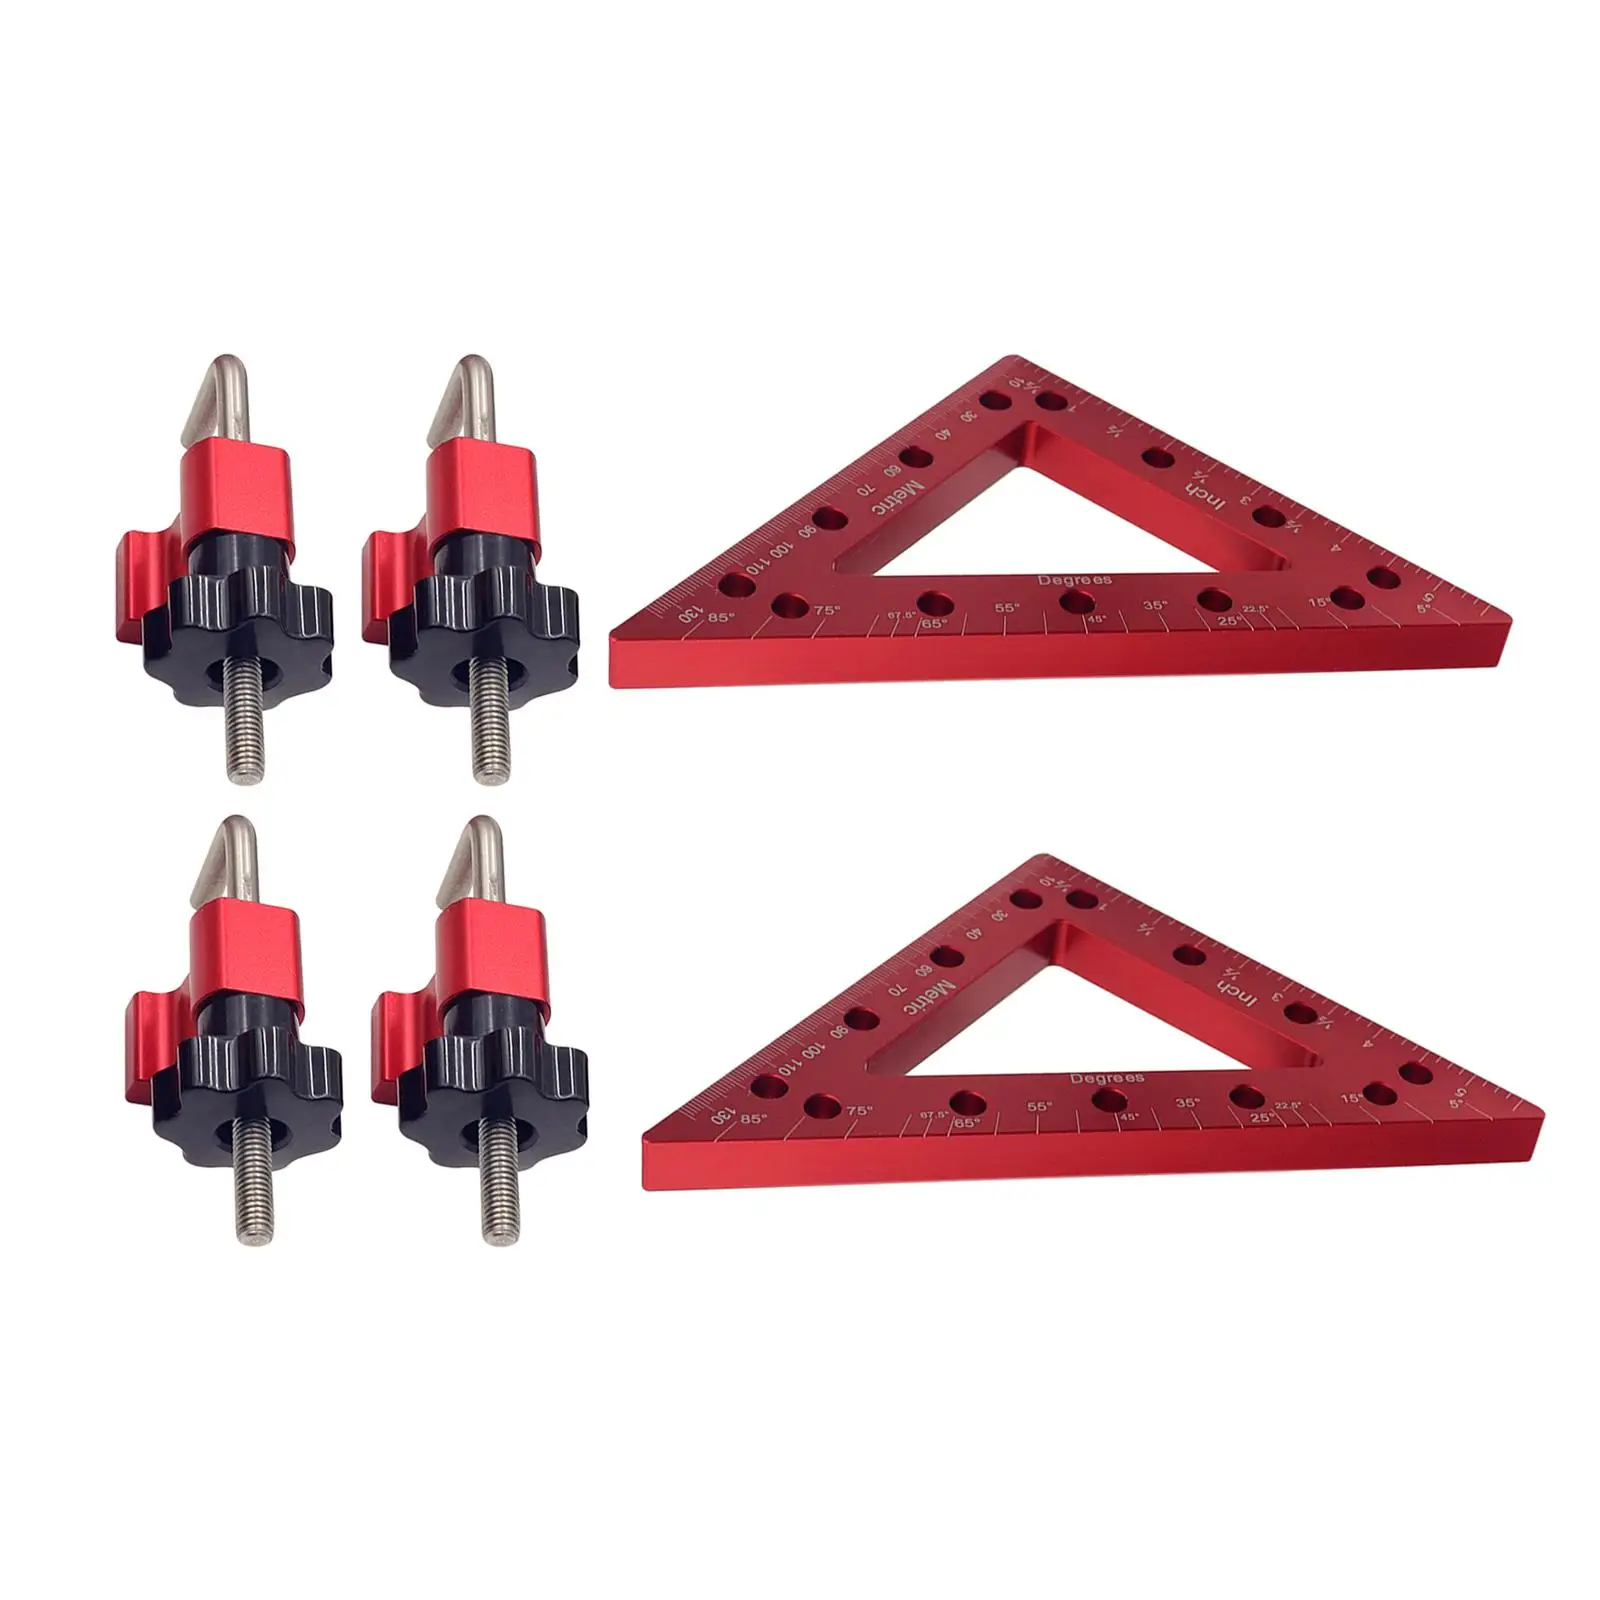 2x Aluminum Alloy Right Angle Clamps 90 Degree Positioning Squares Woodworking Corner Clamp Clamping Tool for Picture Frame Box